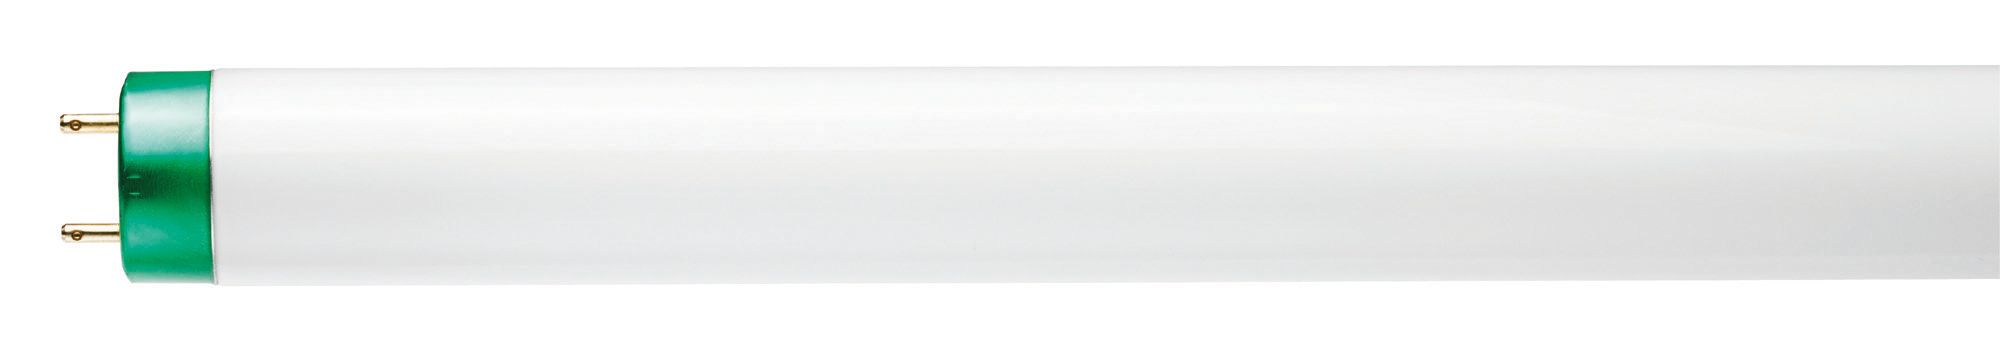 281915 Linear Fluorescent Lamp Philips Lighting;Signify Lamps